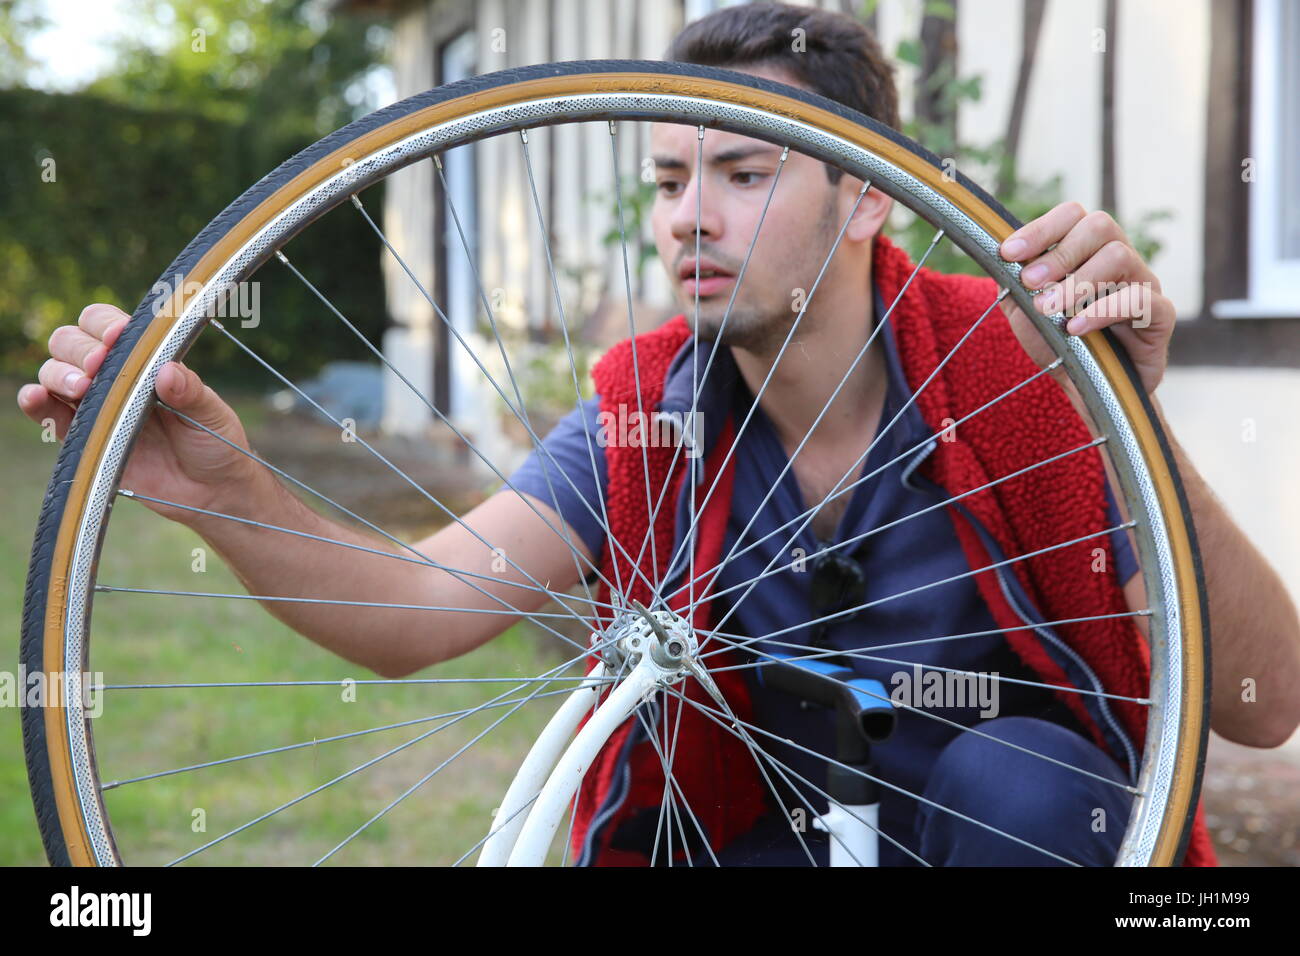 Young man inflating a bicycle tyre. France. Stock Photo